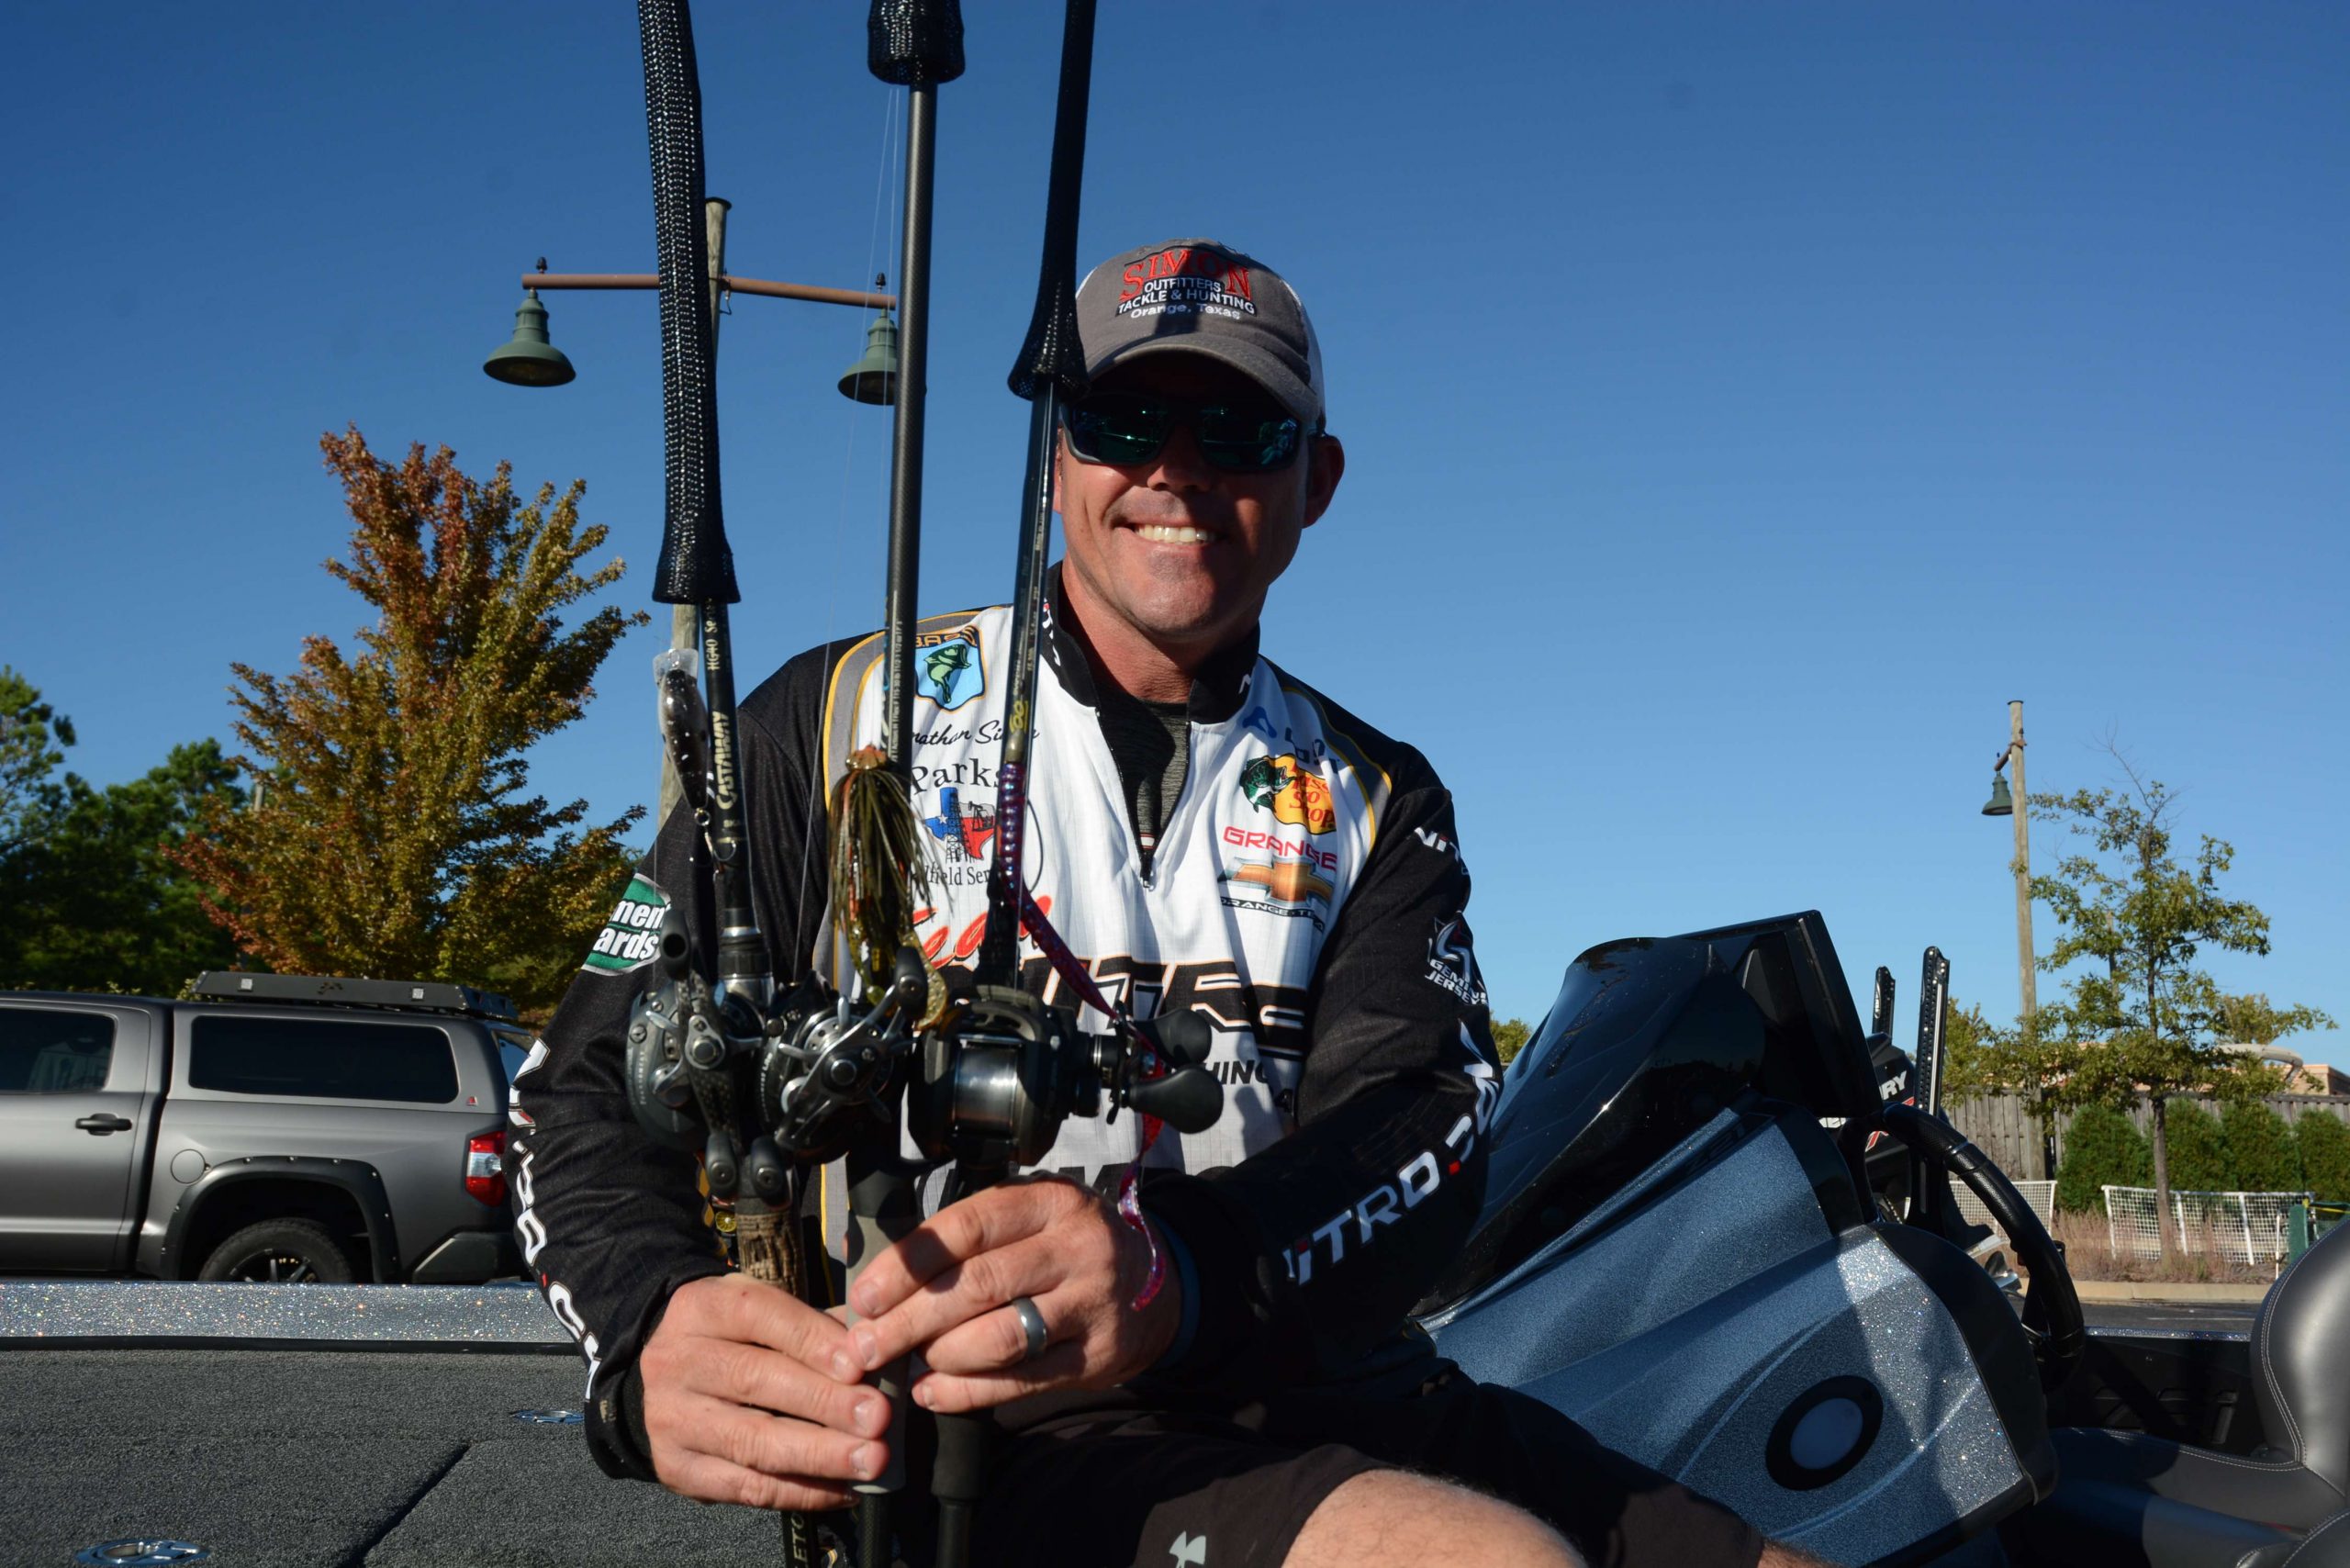 <b>Jonathon Simon</b><br>
Like many of the top anglers Jonathon Simons junked fished his way to finish 10th. A 5/8- or 3/4-ounce V&M Cliff Pace The Flatline Pacemaker Football Jig with Strike King Rage Craw was a key choice. 
